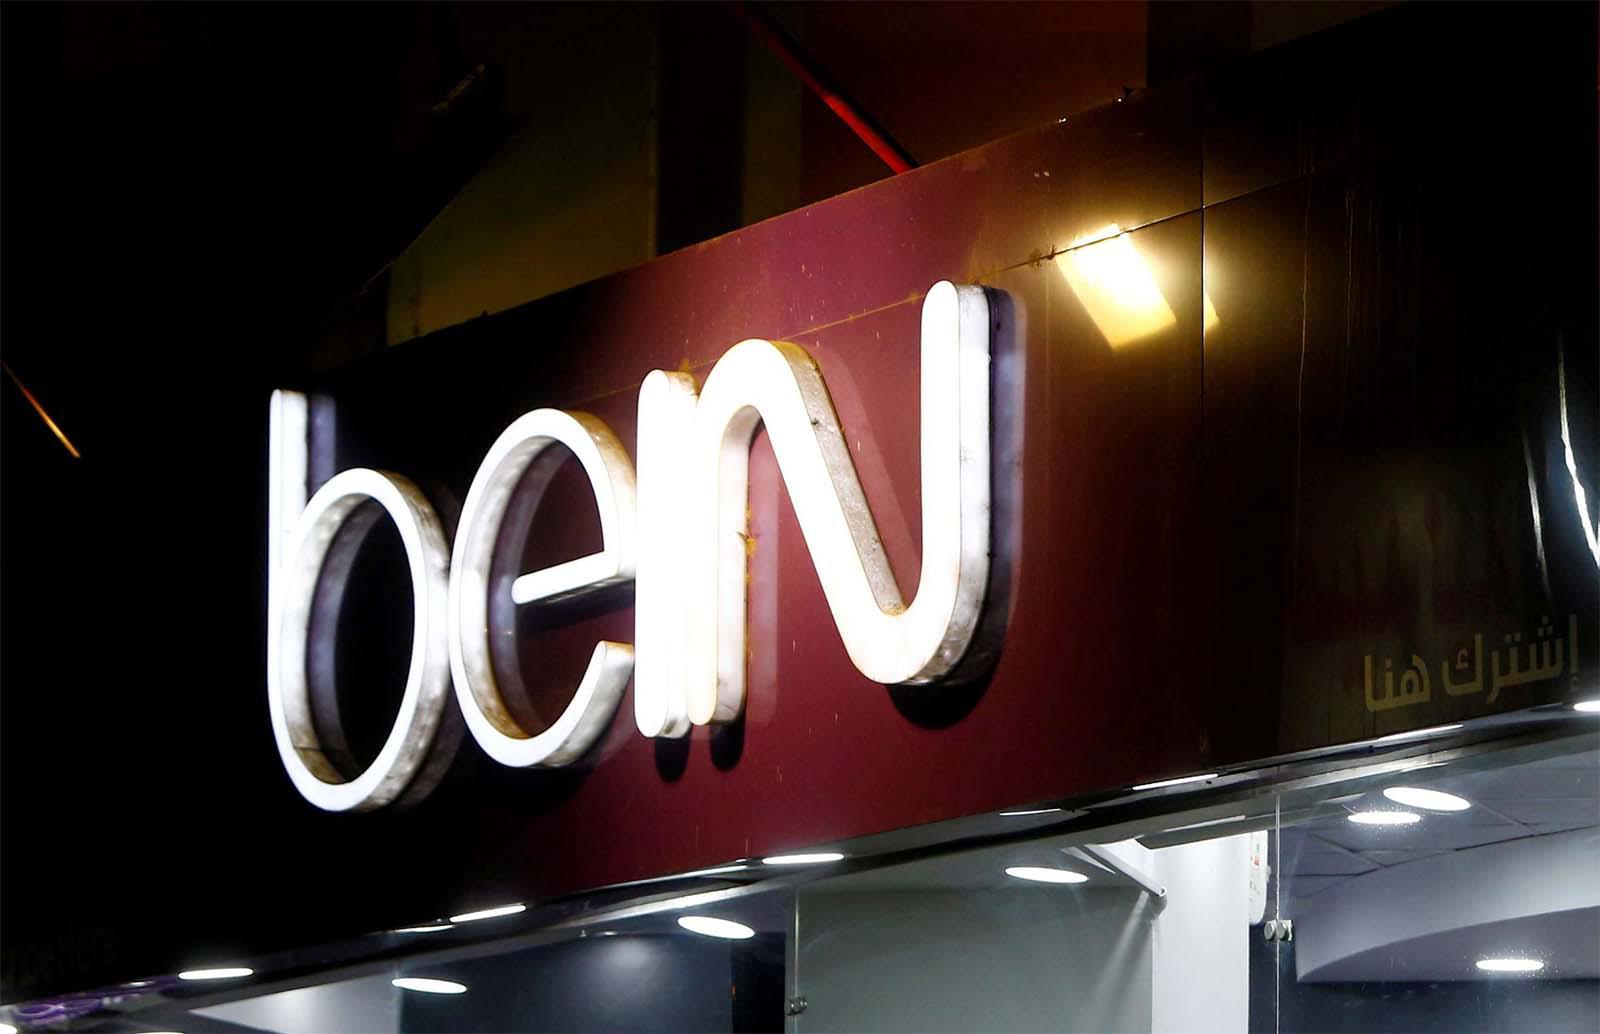 Saudi Arabia’s General Authority for Competition had permanently cancelled BeIN's license in July 